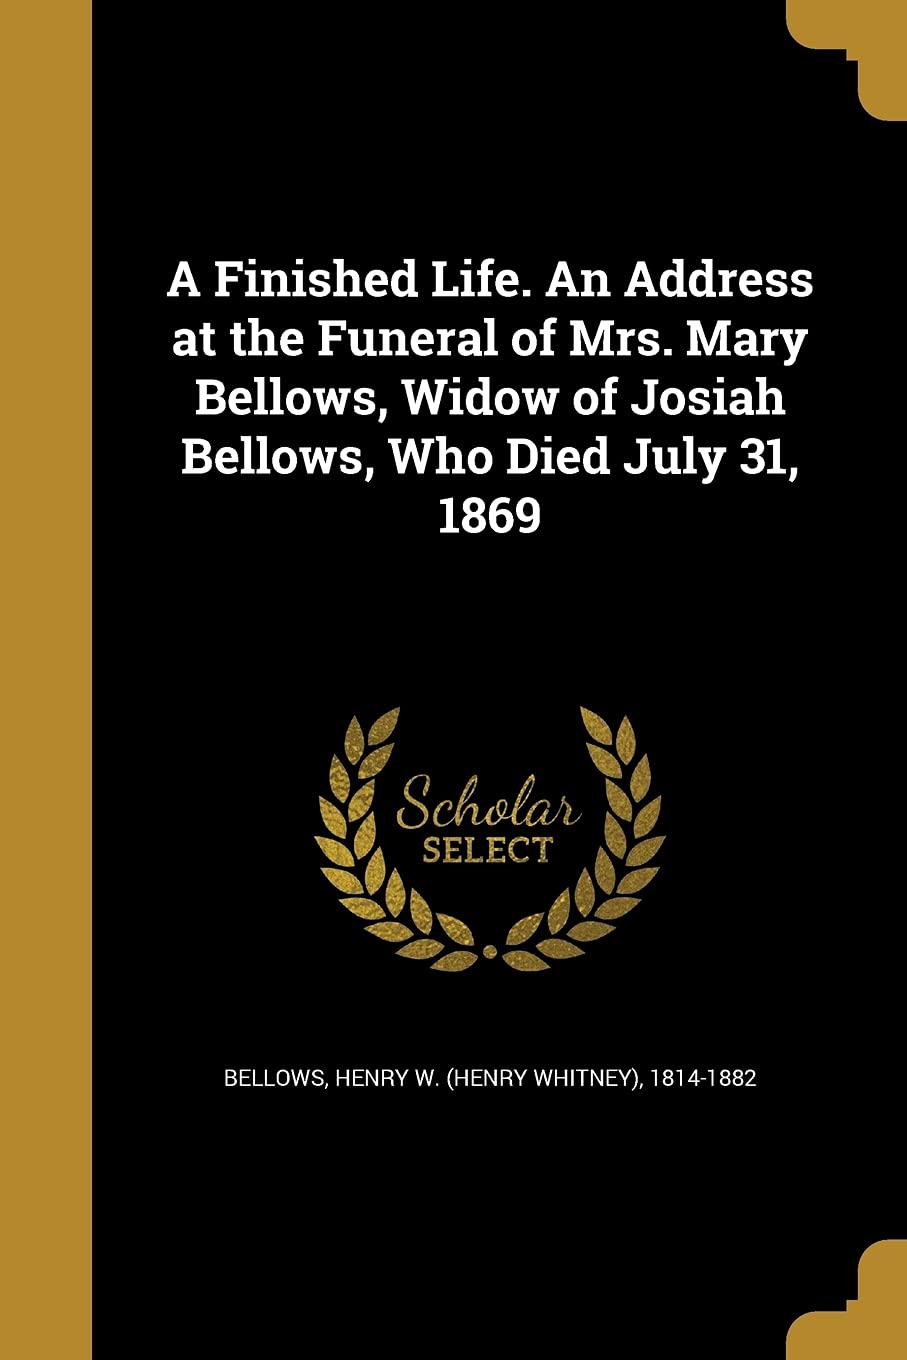 A Finished Life. An Address at the Funeral of Mrs. Mary Bellows, Widow of Josiah Bellows, Who Died July 31